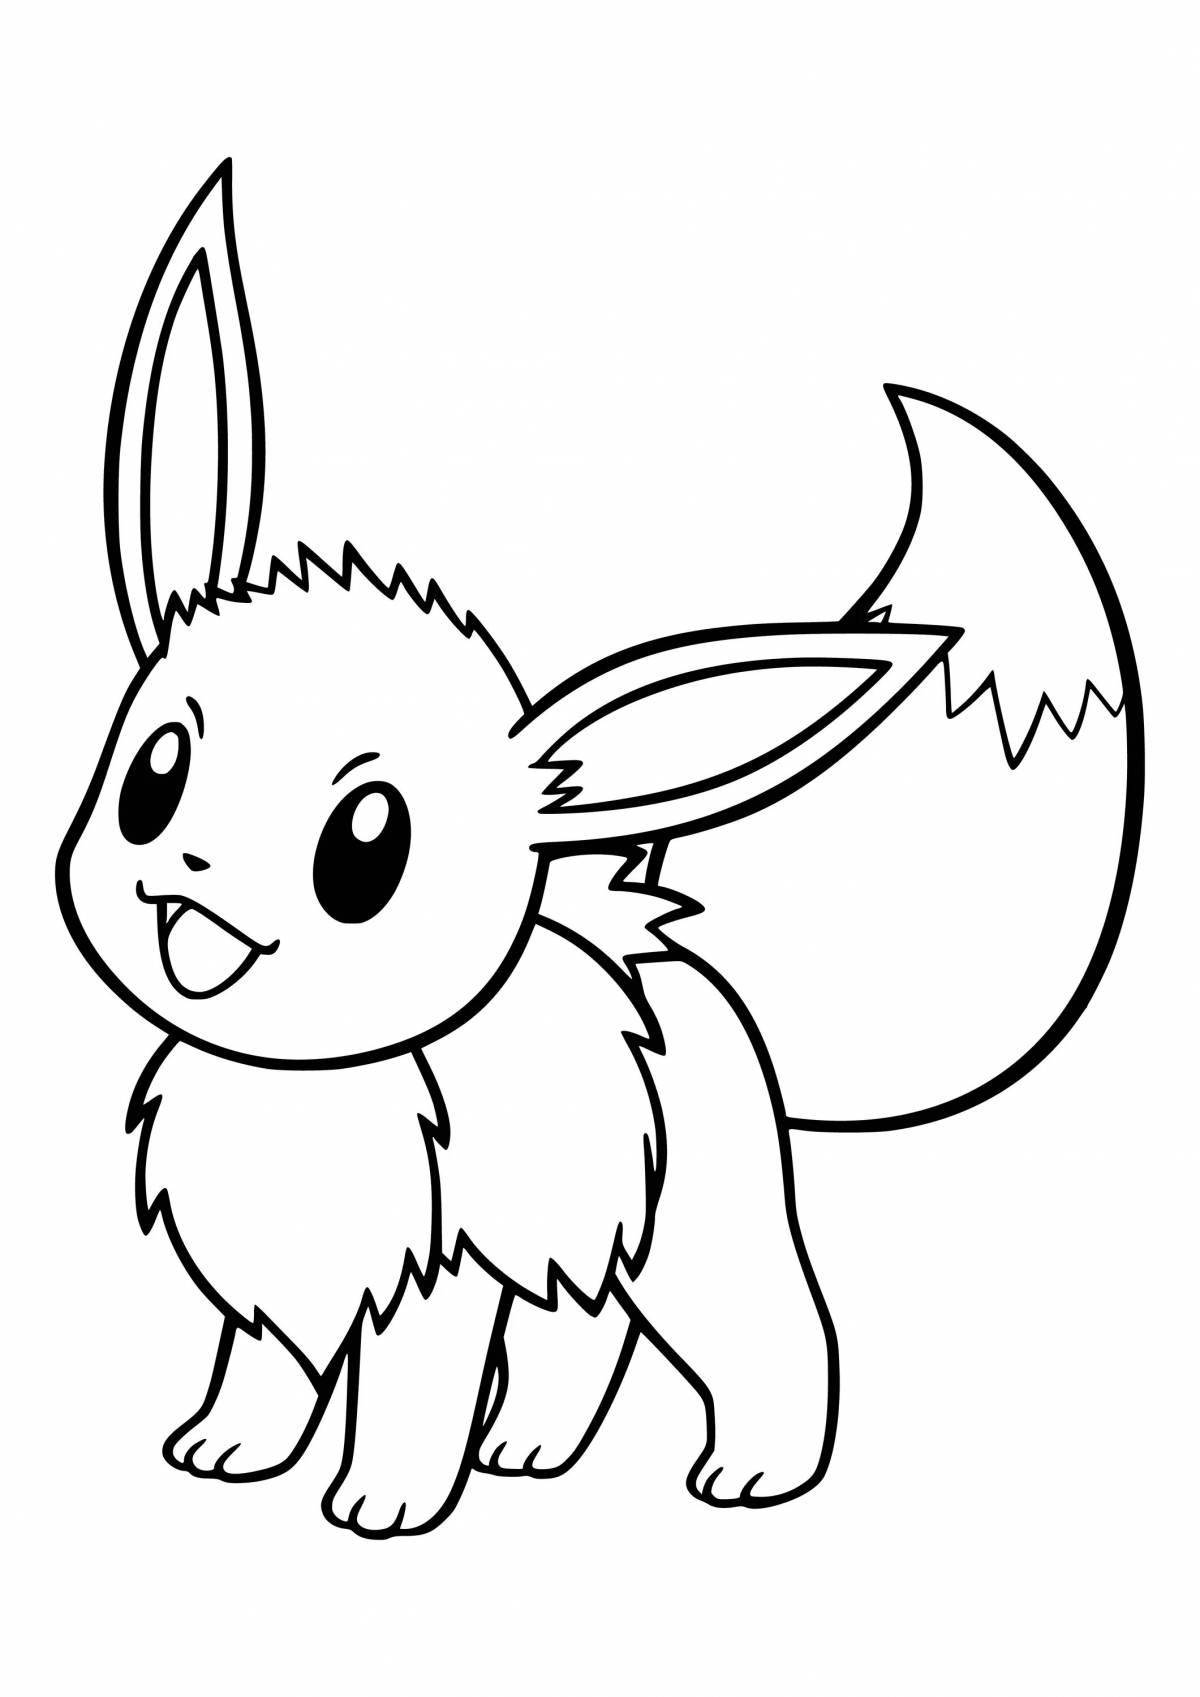 Incredibly high quality pokemon coloring